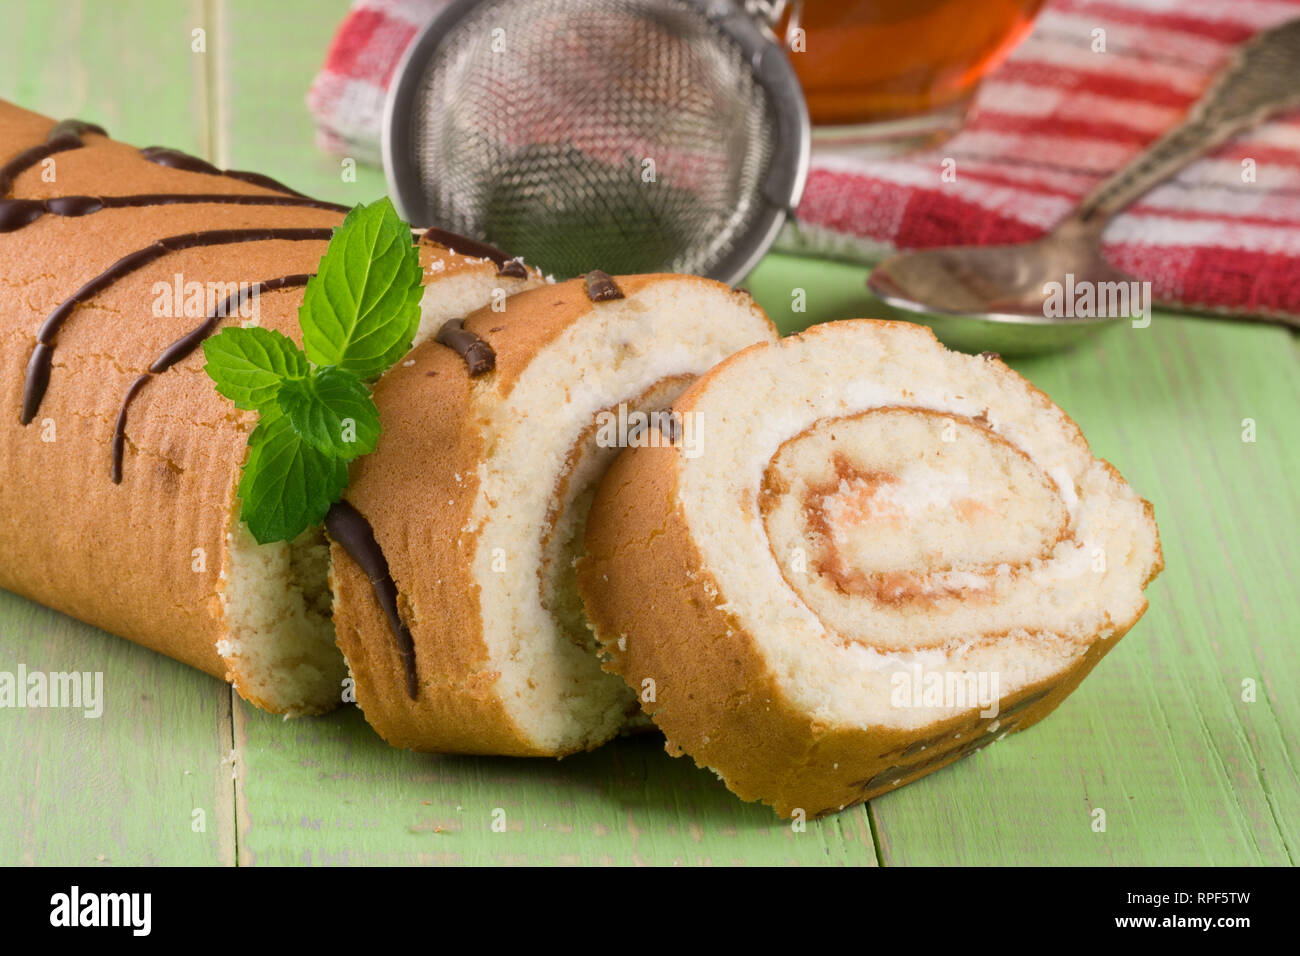 Biscuit swiss roll on green wooden background Stock Photo